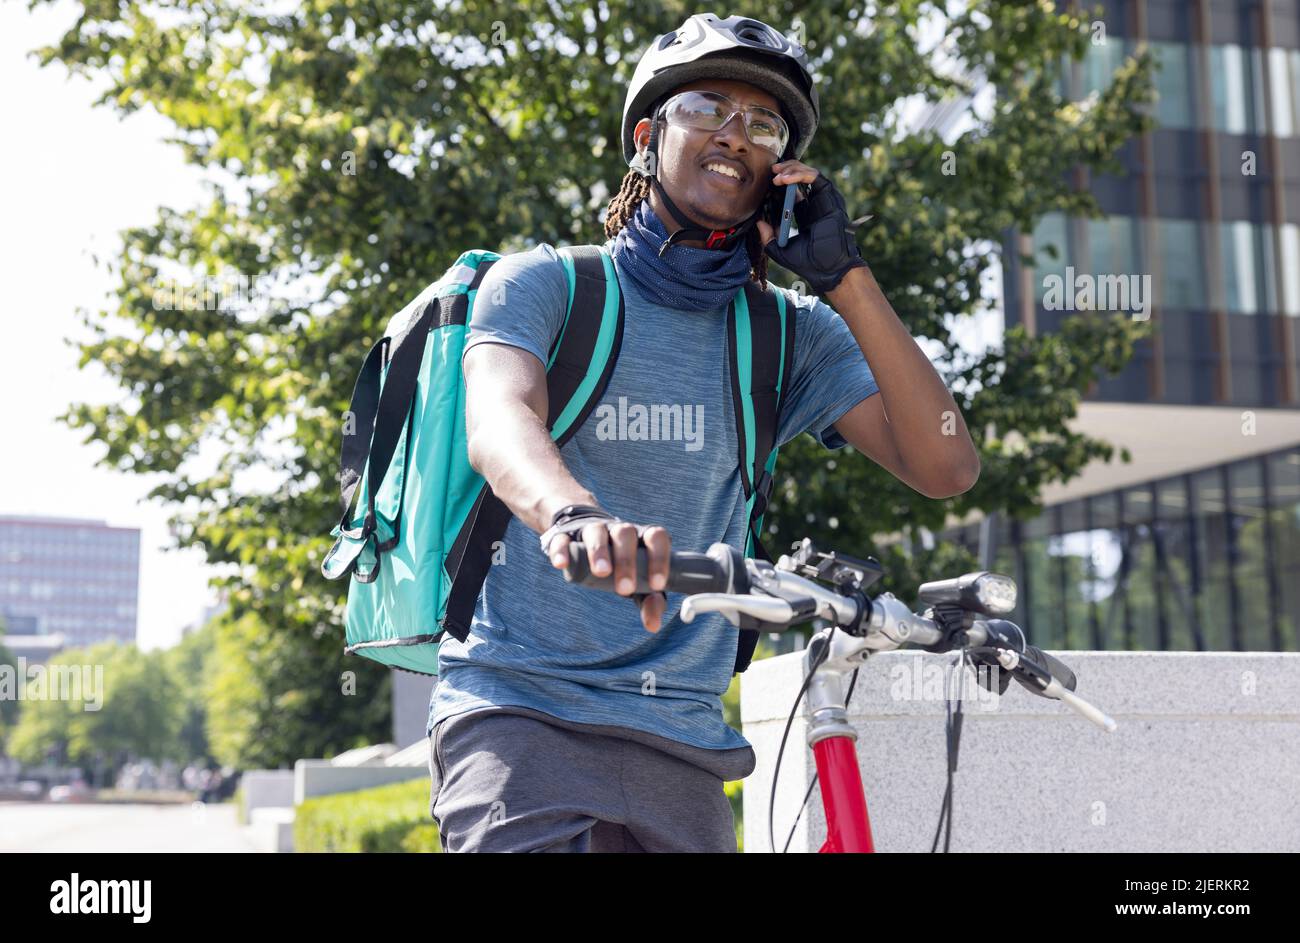 Courier On Bike Delivering Takeaway Food In City Making Call On Mobile Phone Stock Photo